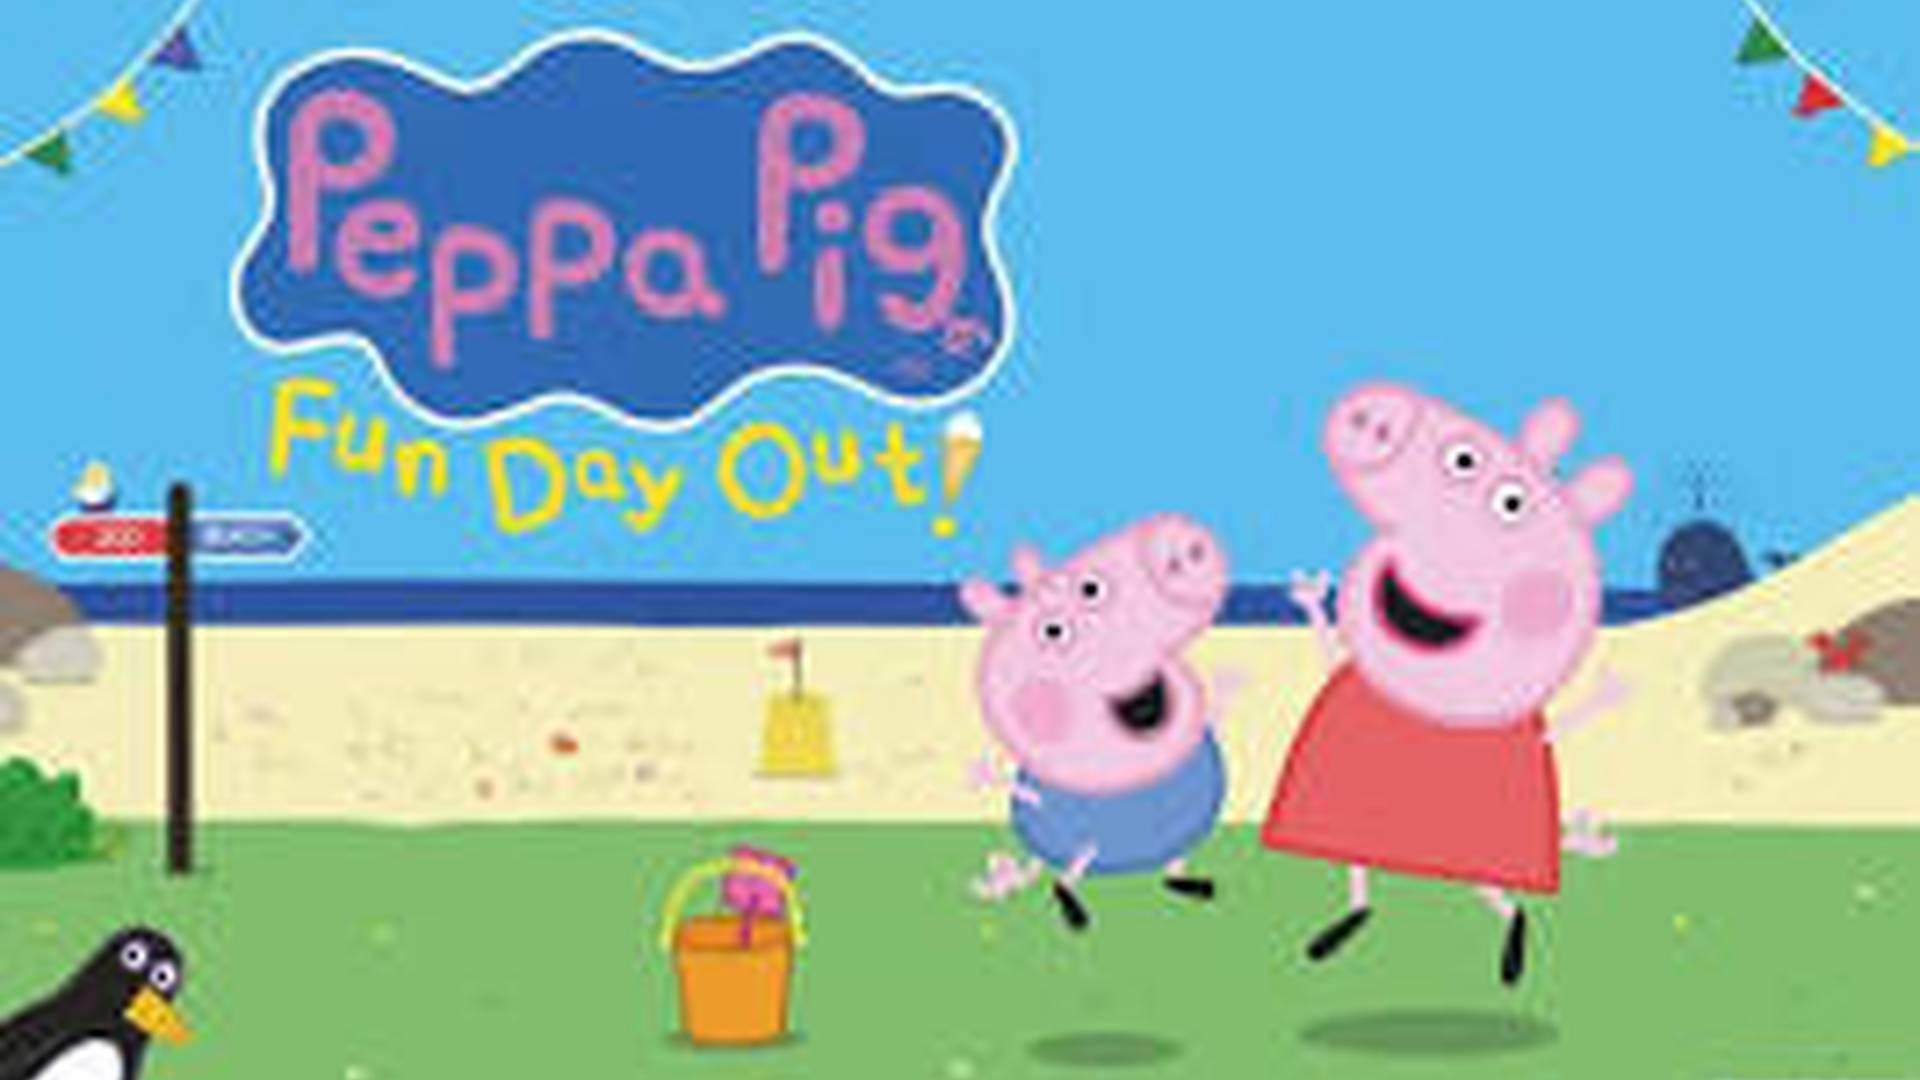 Peppa Pig's Fun Day Out photo